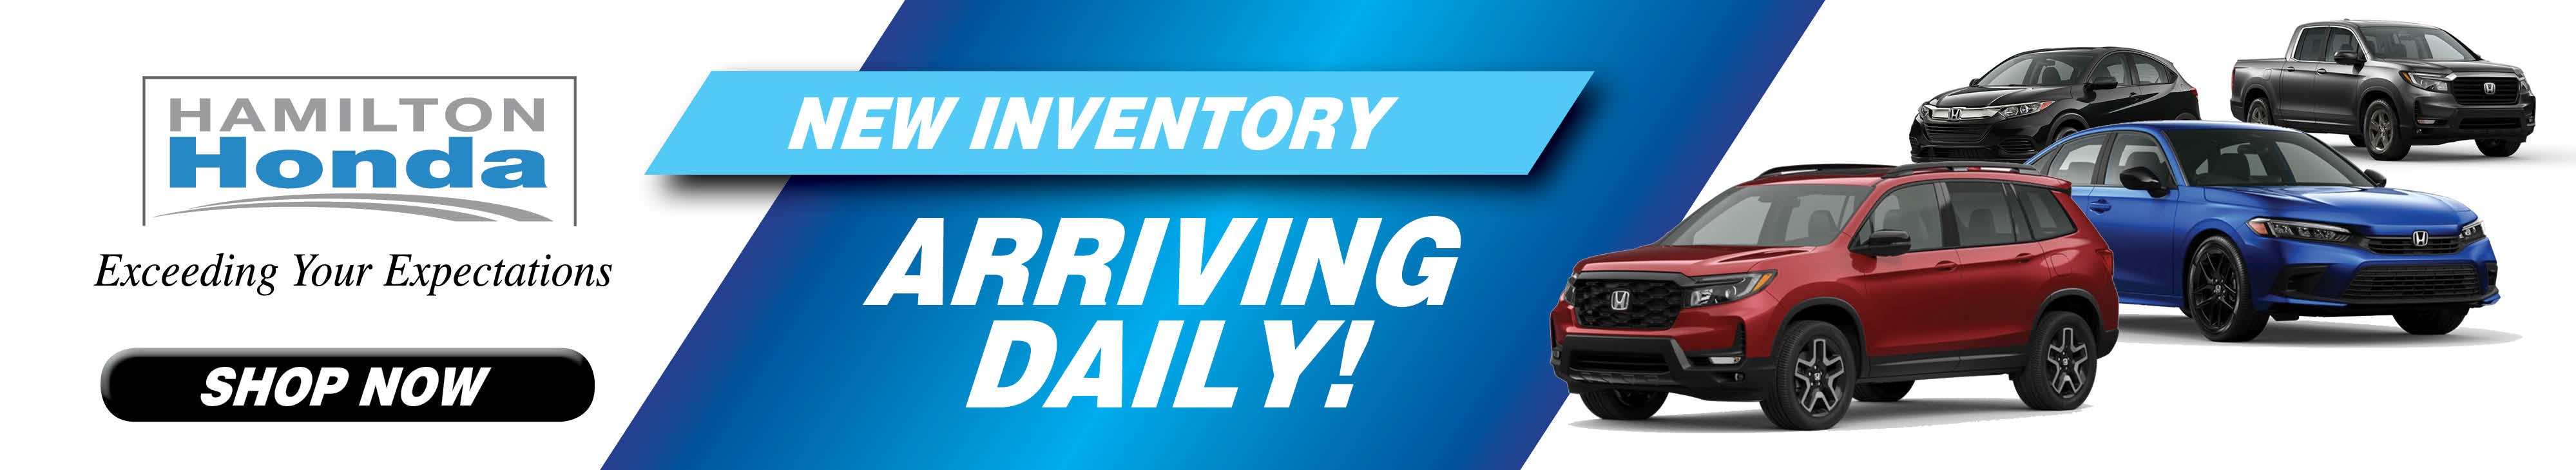 New Inventory Arriving Daily!